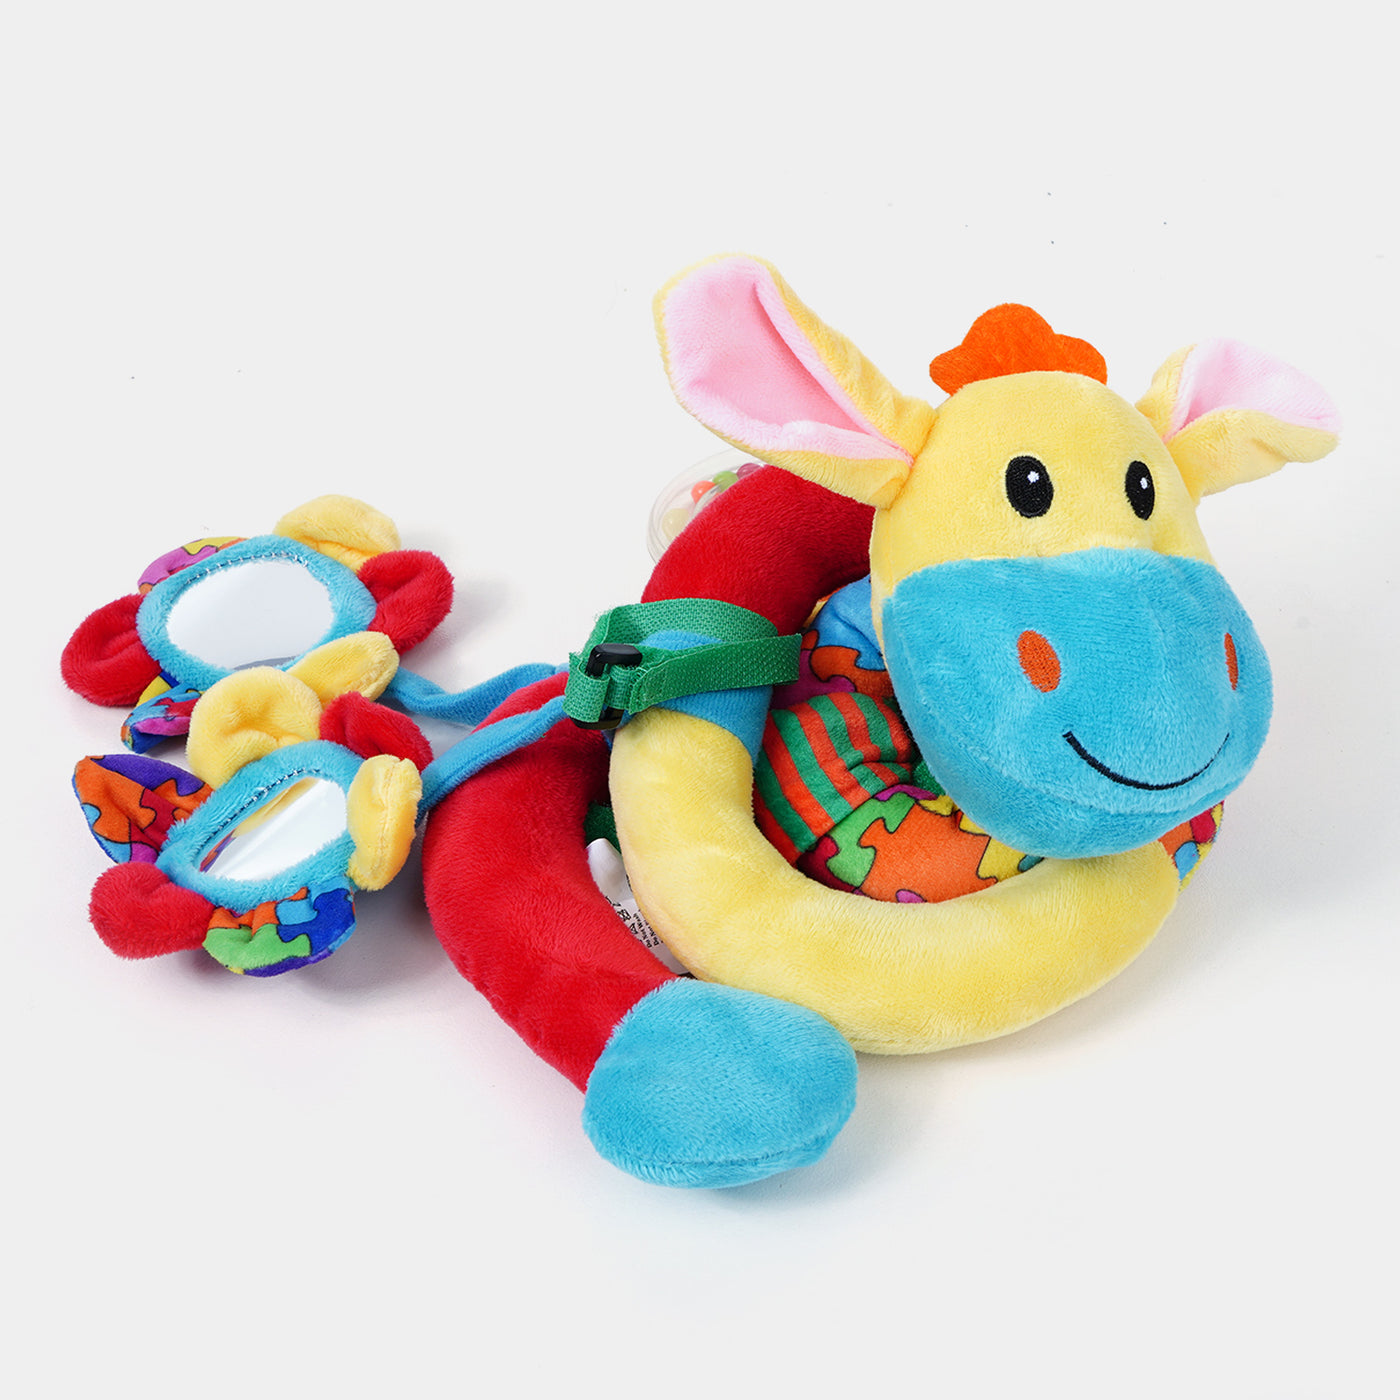 Baby Soft Hanging Activity Rattle Toy